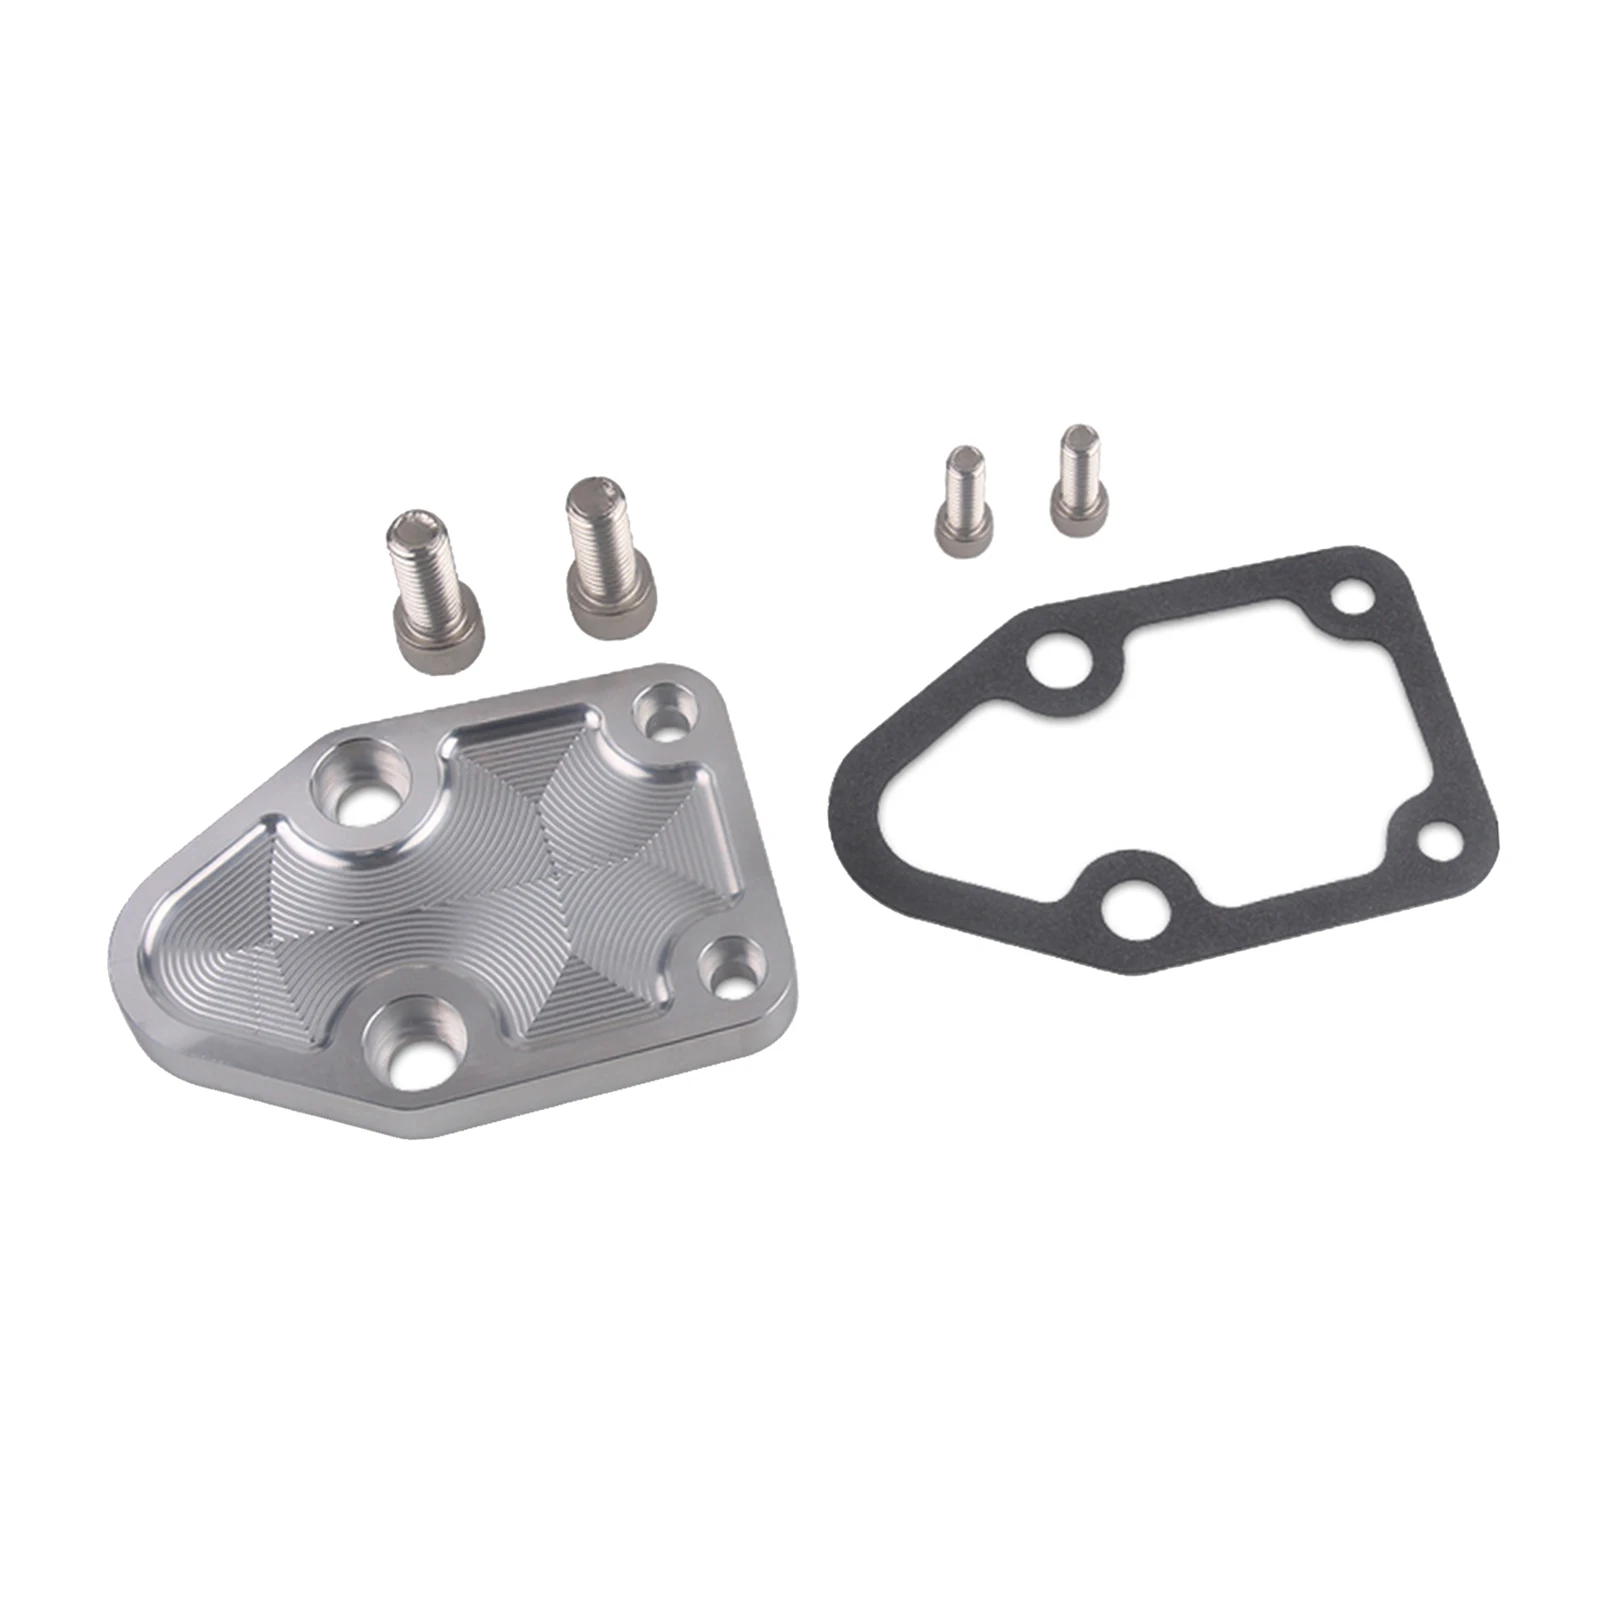 Aluminum Fuel Pump Mounting Plate Set Replace for CHEVY 283 327 350 400